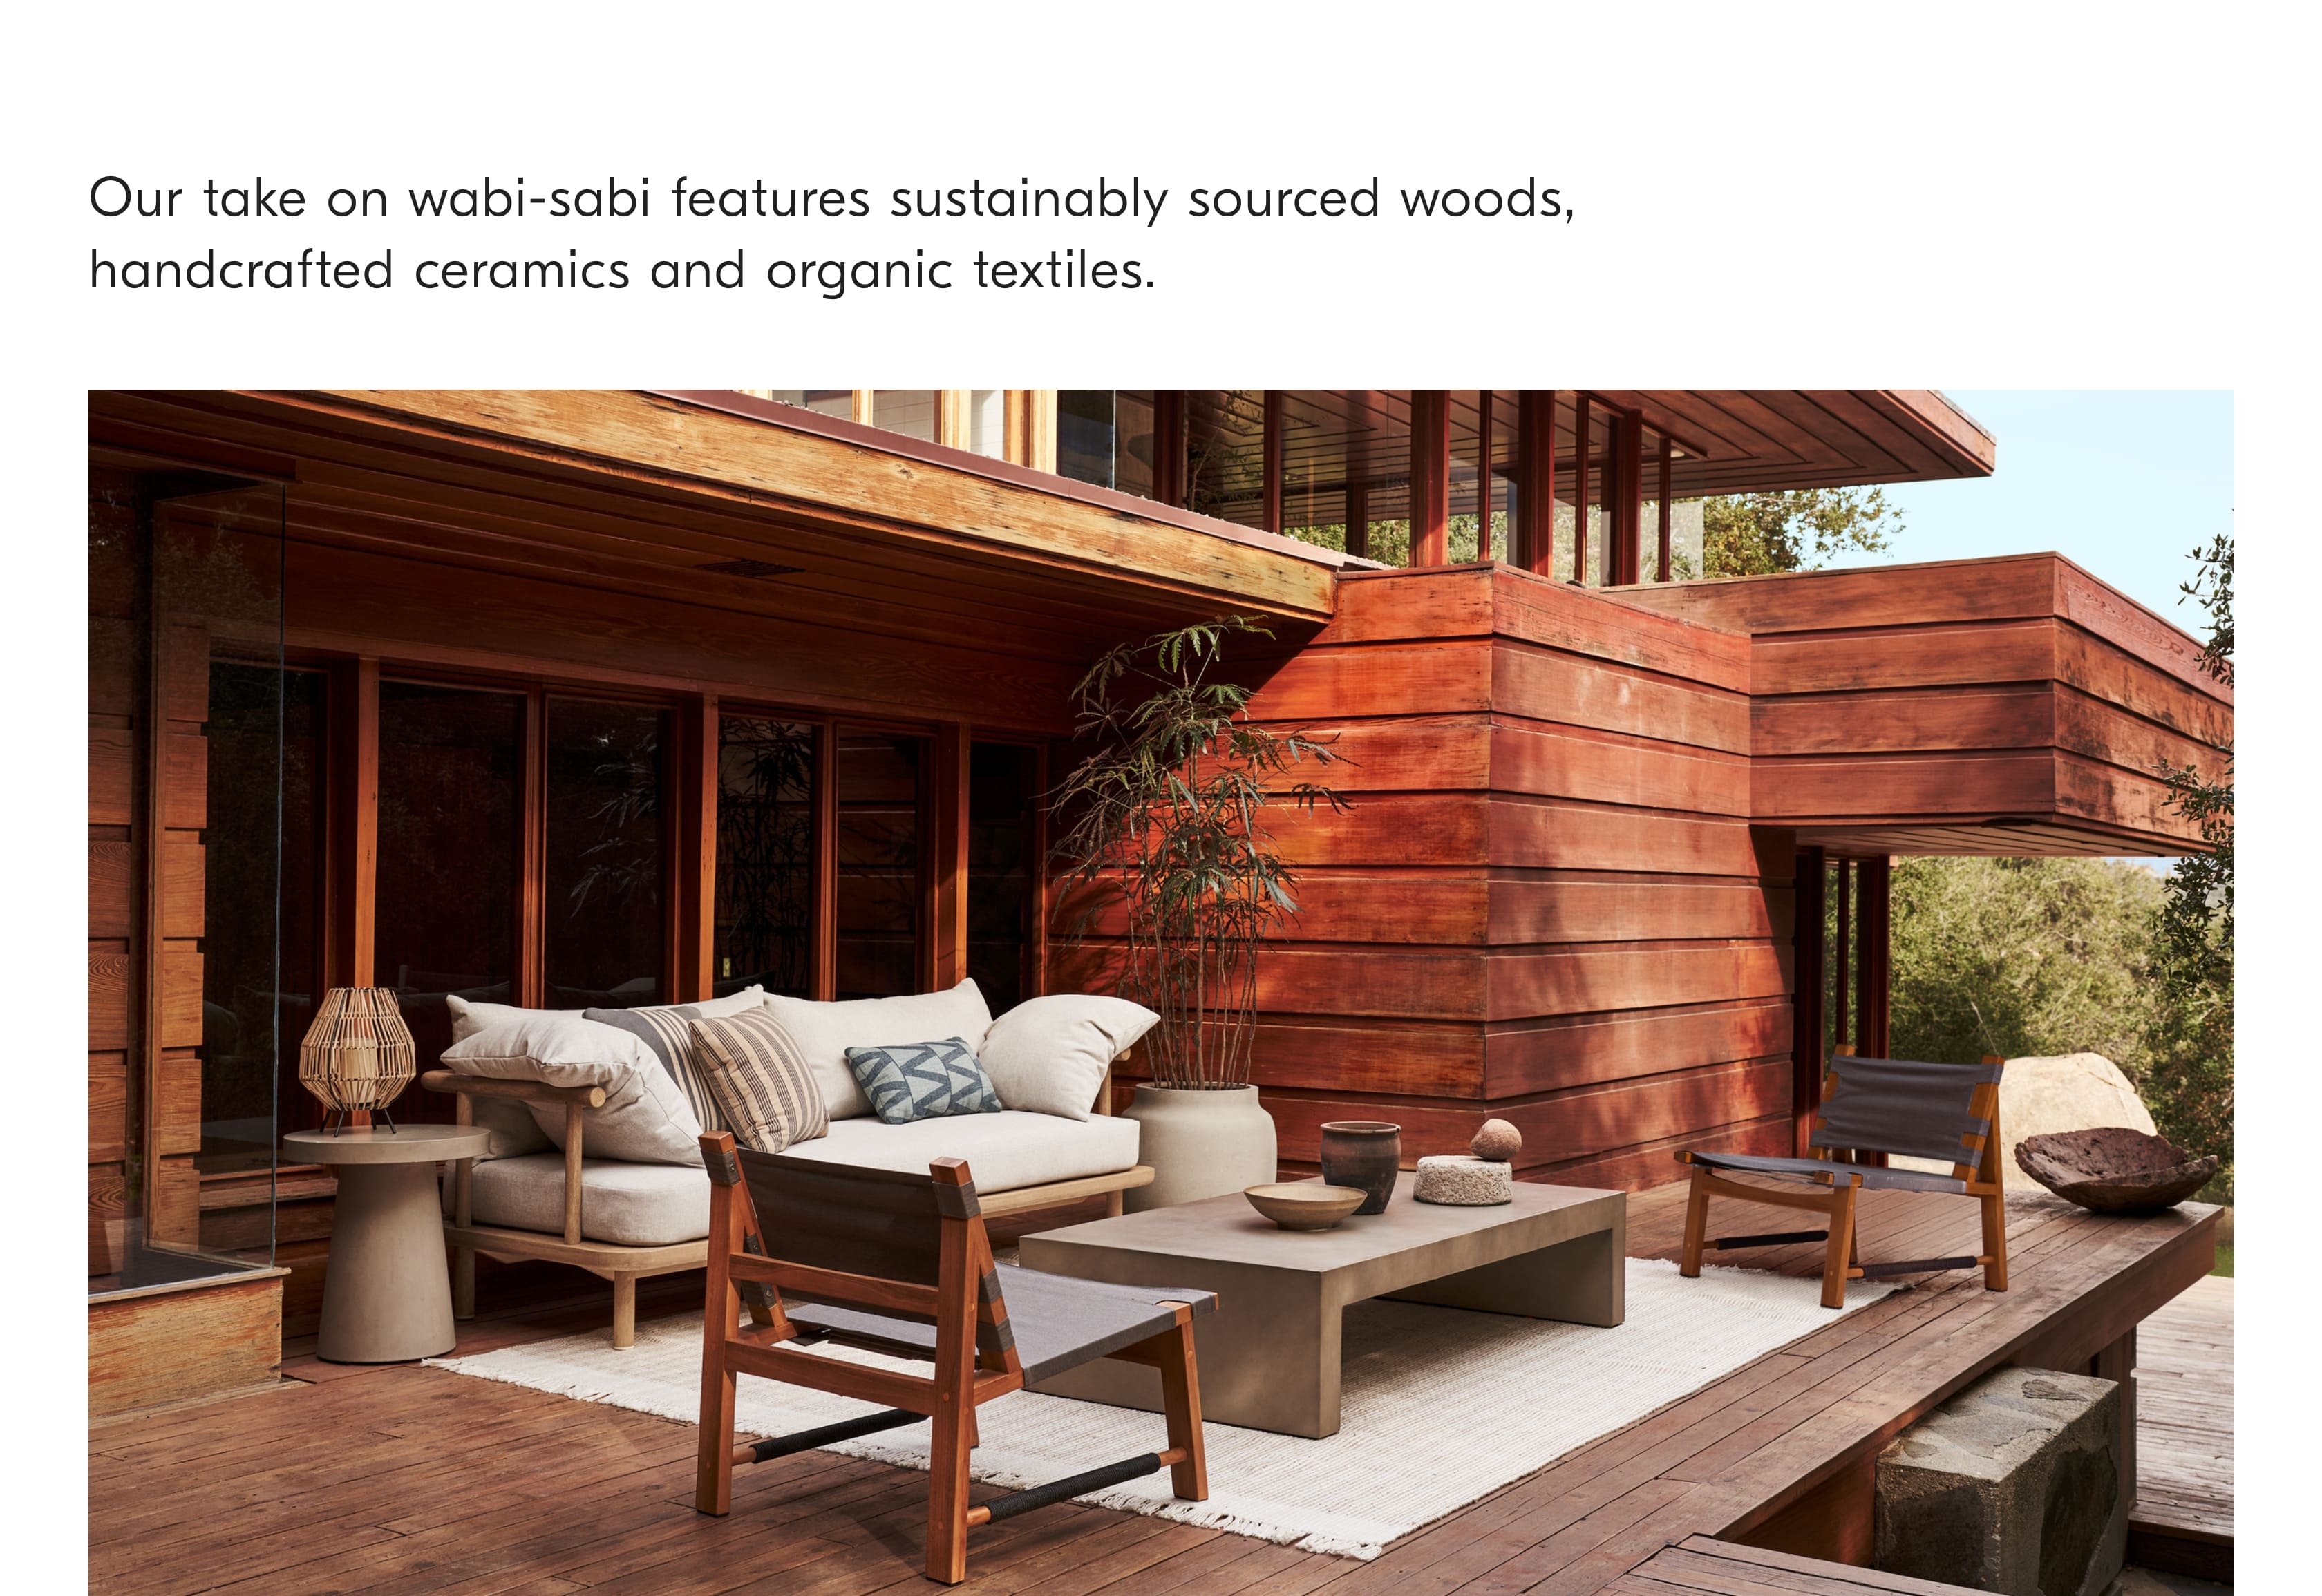 Our take on wabi-sabi features sustainability sourced woods, handcrafted ceramics and organic textiles